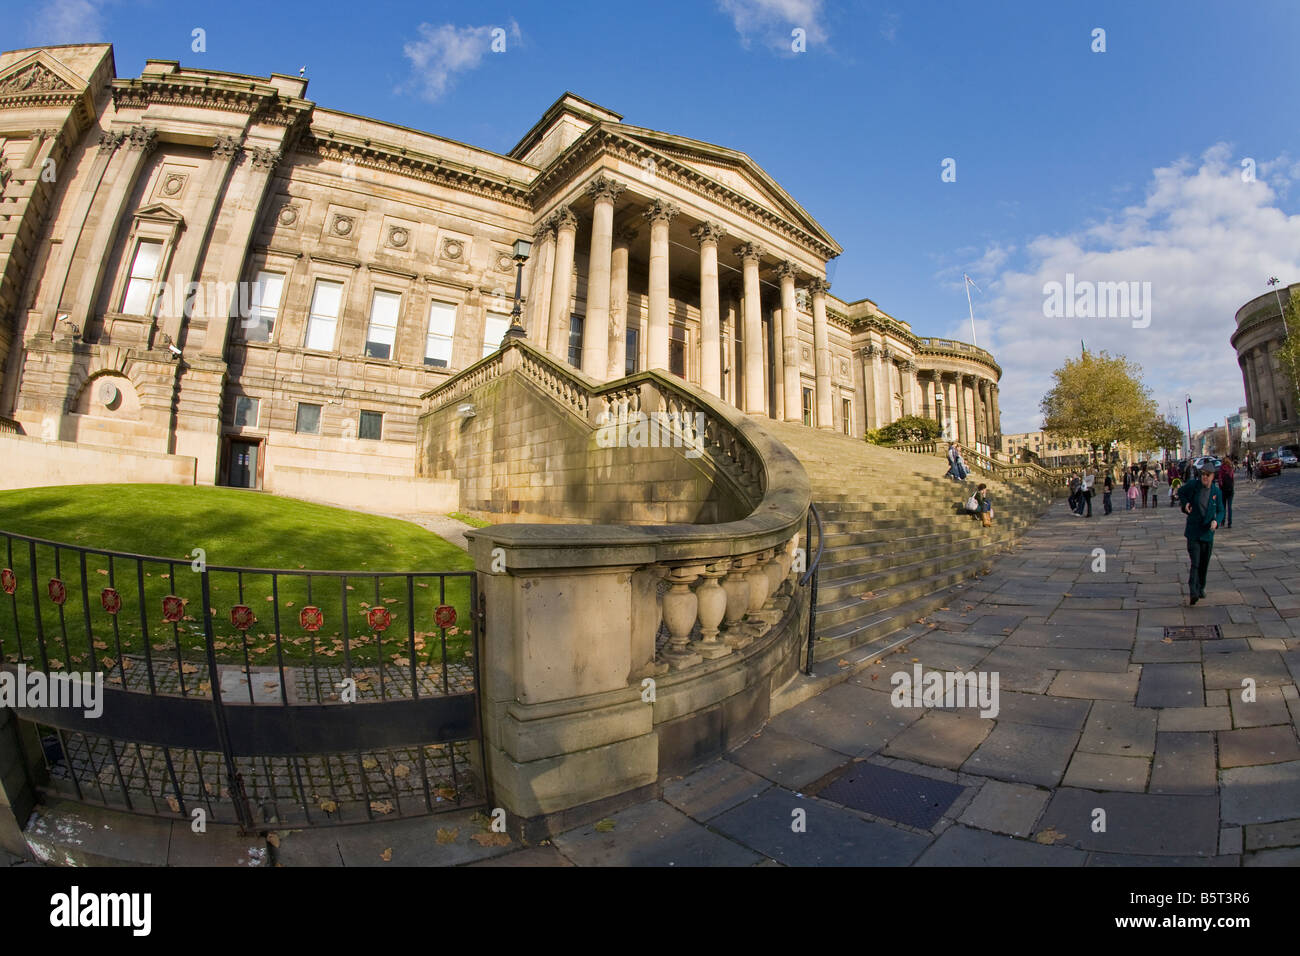 Record Office Central Library on William Brown Street  Liverpool Merseyside England UK United Kingdom GB Great Britain Stock Photo